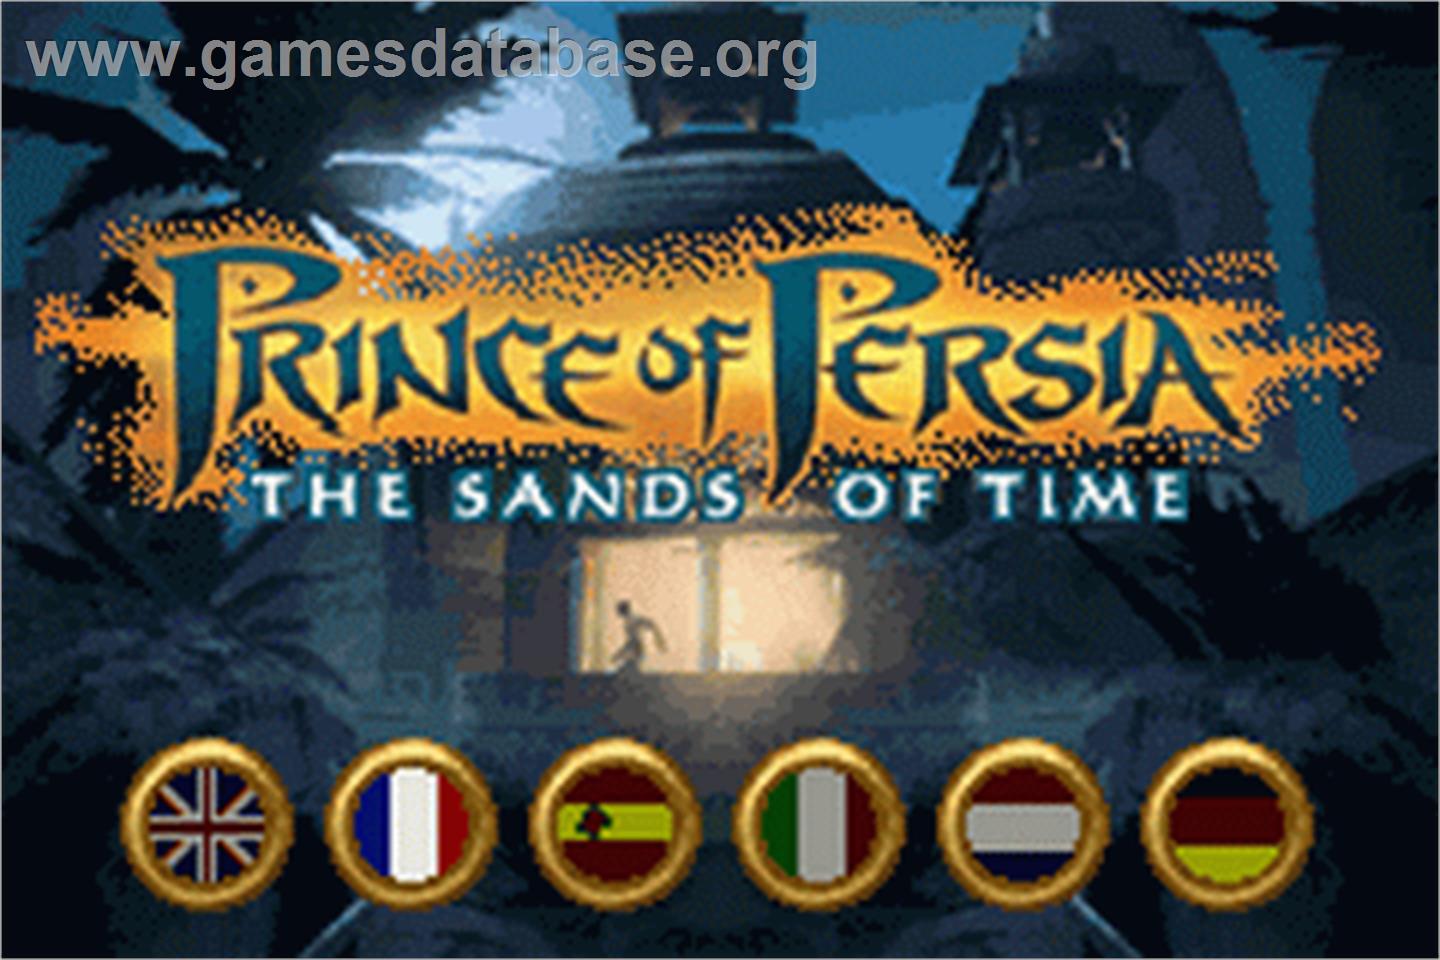 Prince of Persia: The Sands of Time - Nintendo Game Boy Advance - Artwork - Title Screen